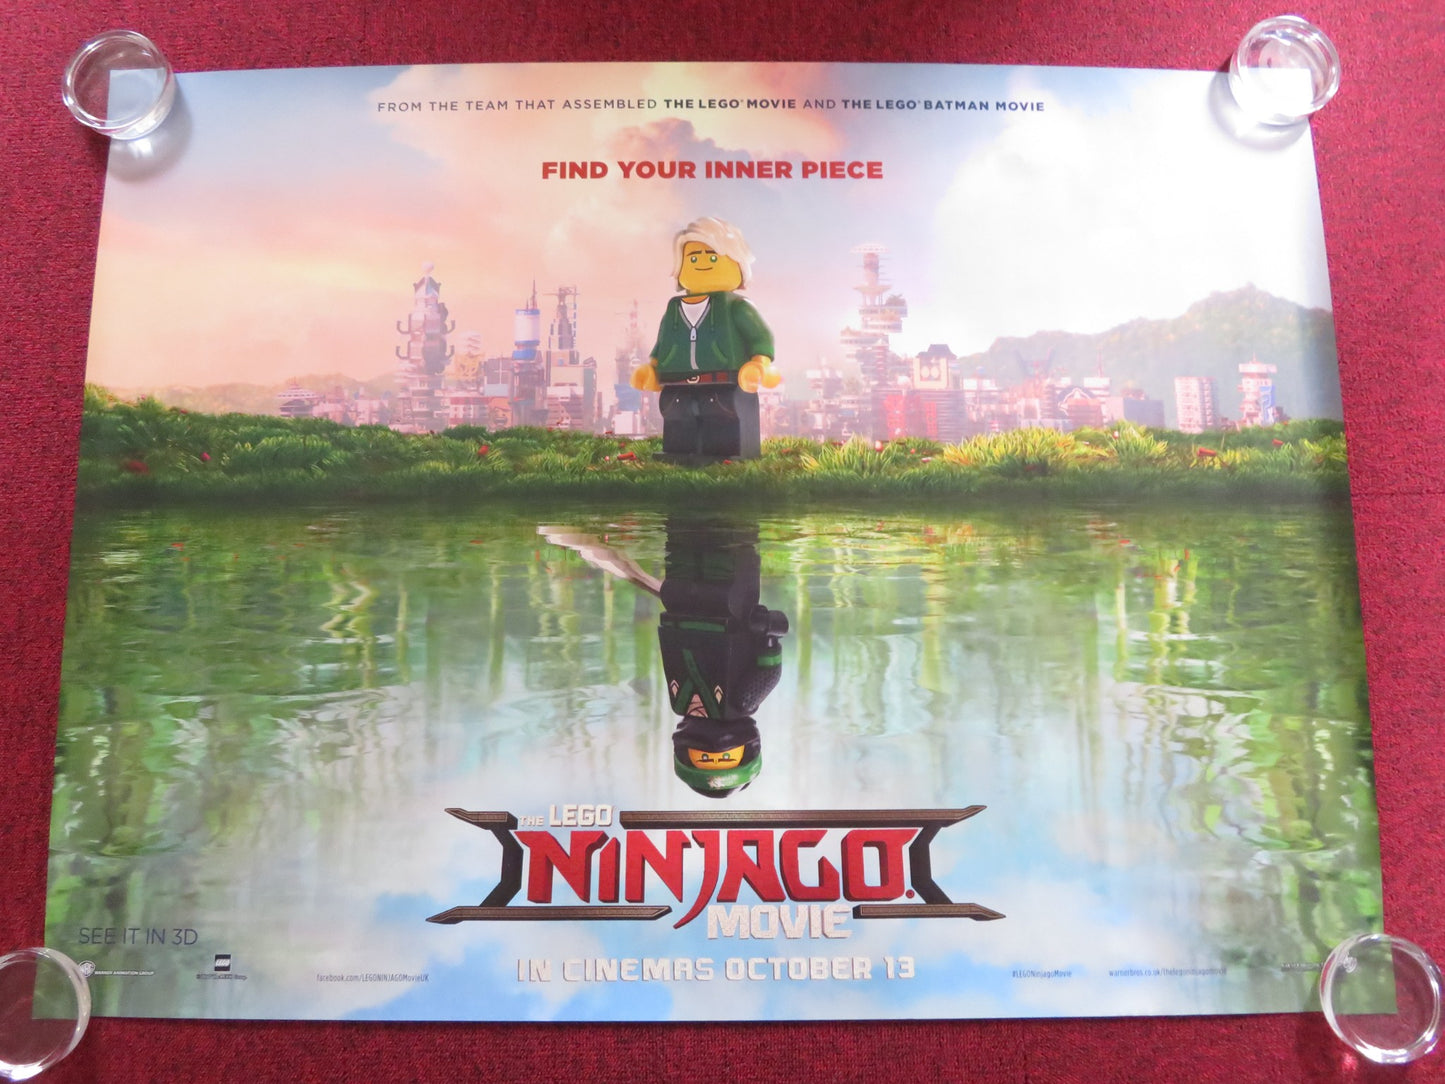 THE LEGO NINJAGO MOVIE UK QUAD (30"x 40") ROLLED POSTER JACKIE CHAN 2017